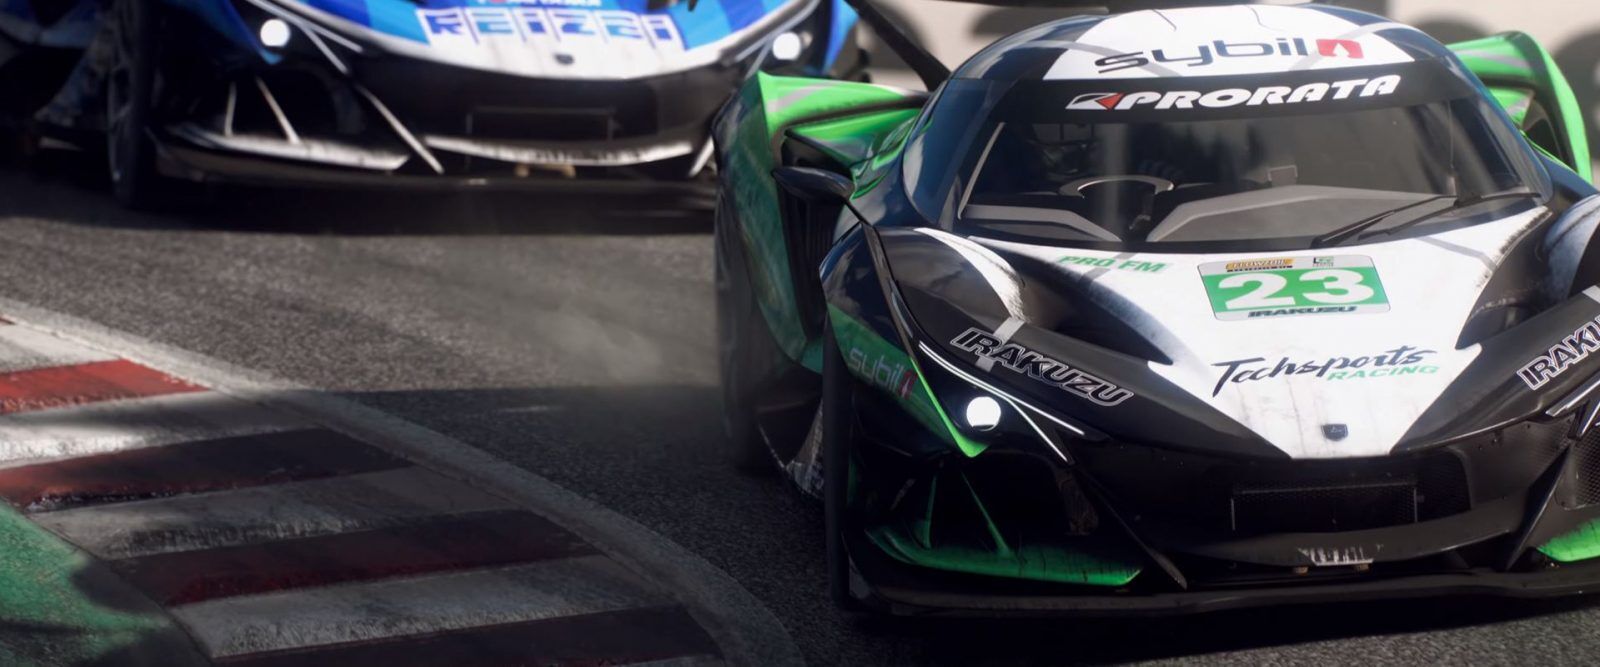 New Forza Motorsport announced